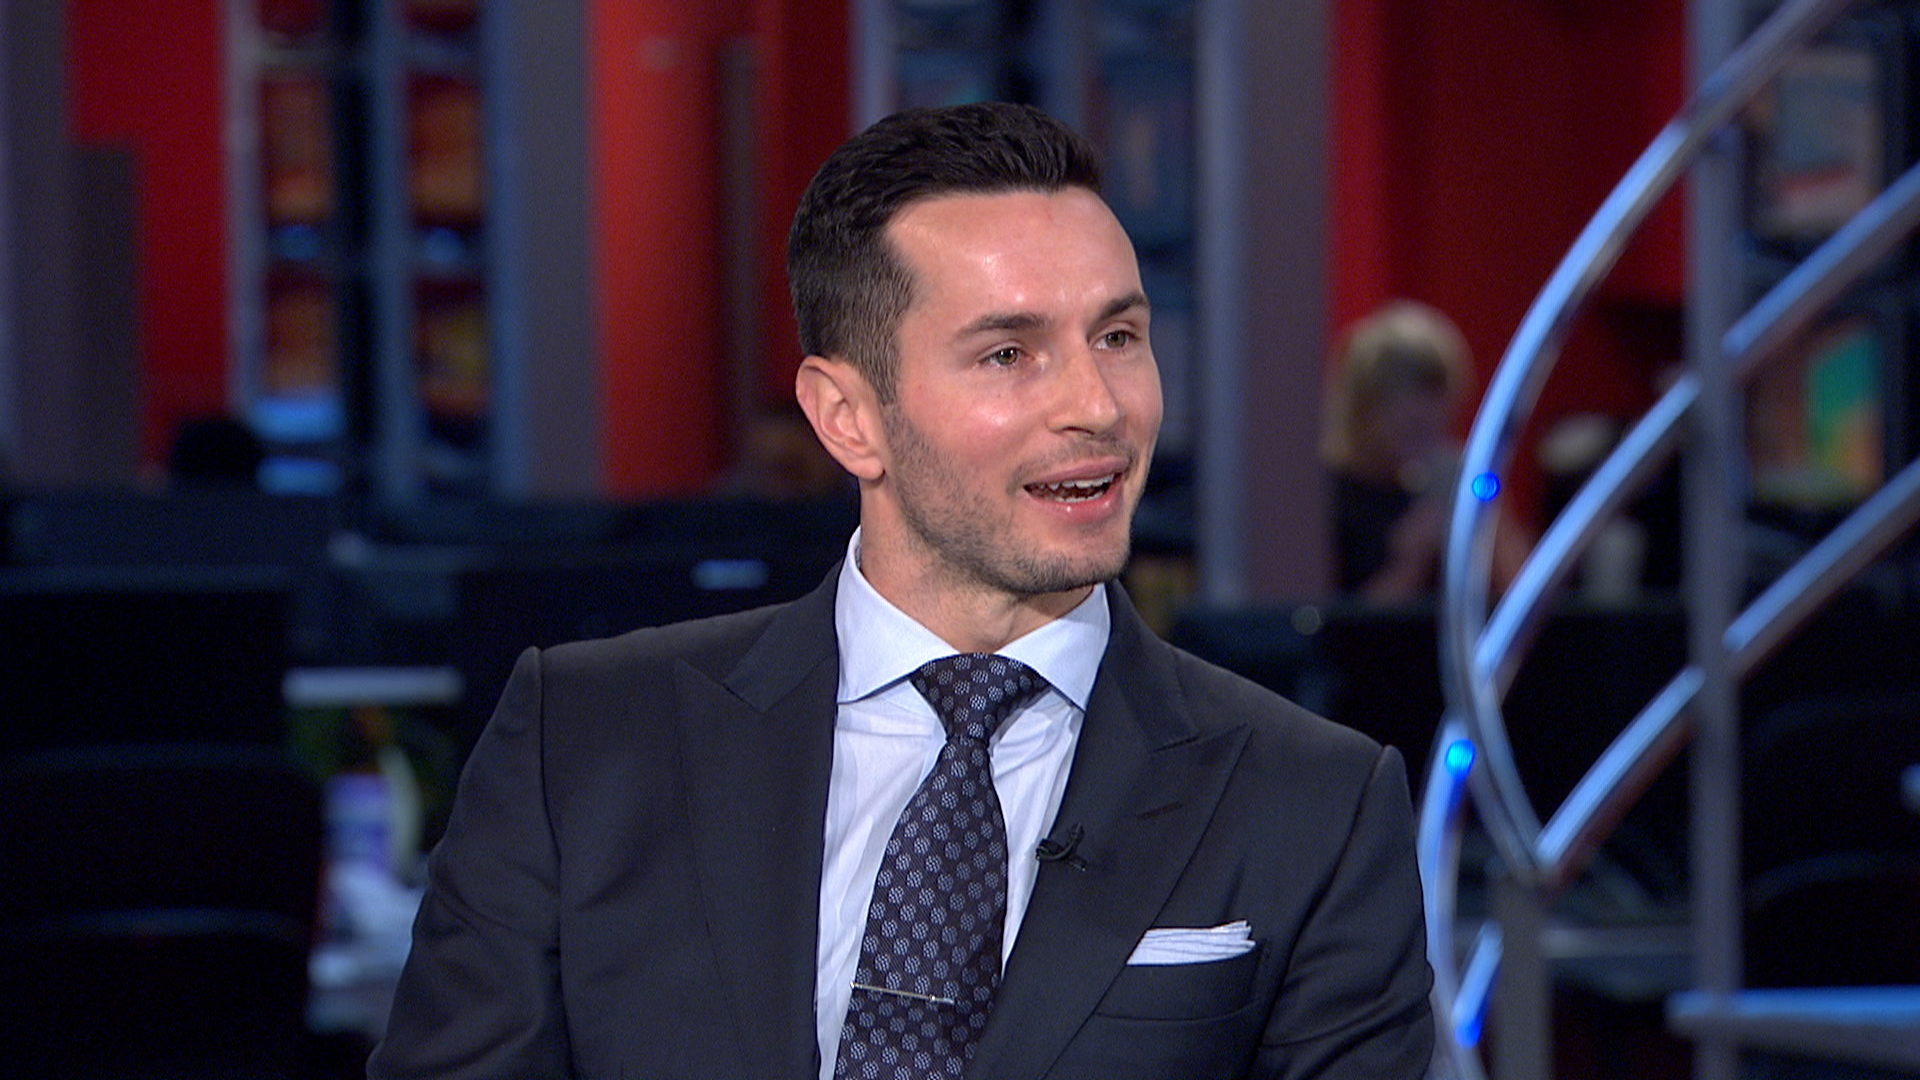 J.J. Redick on his college and pro career